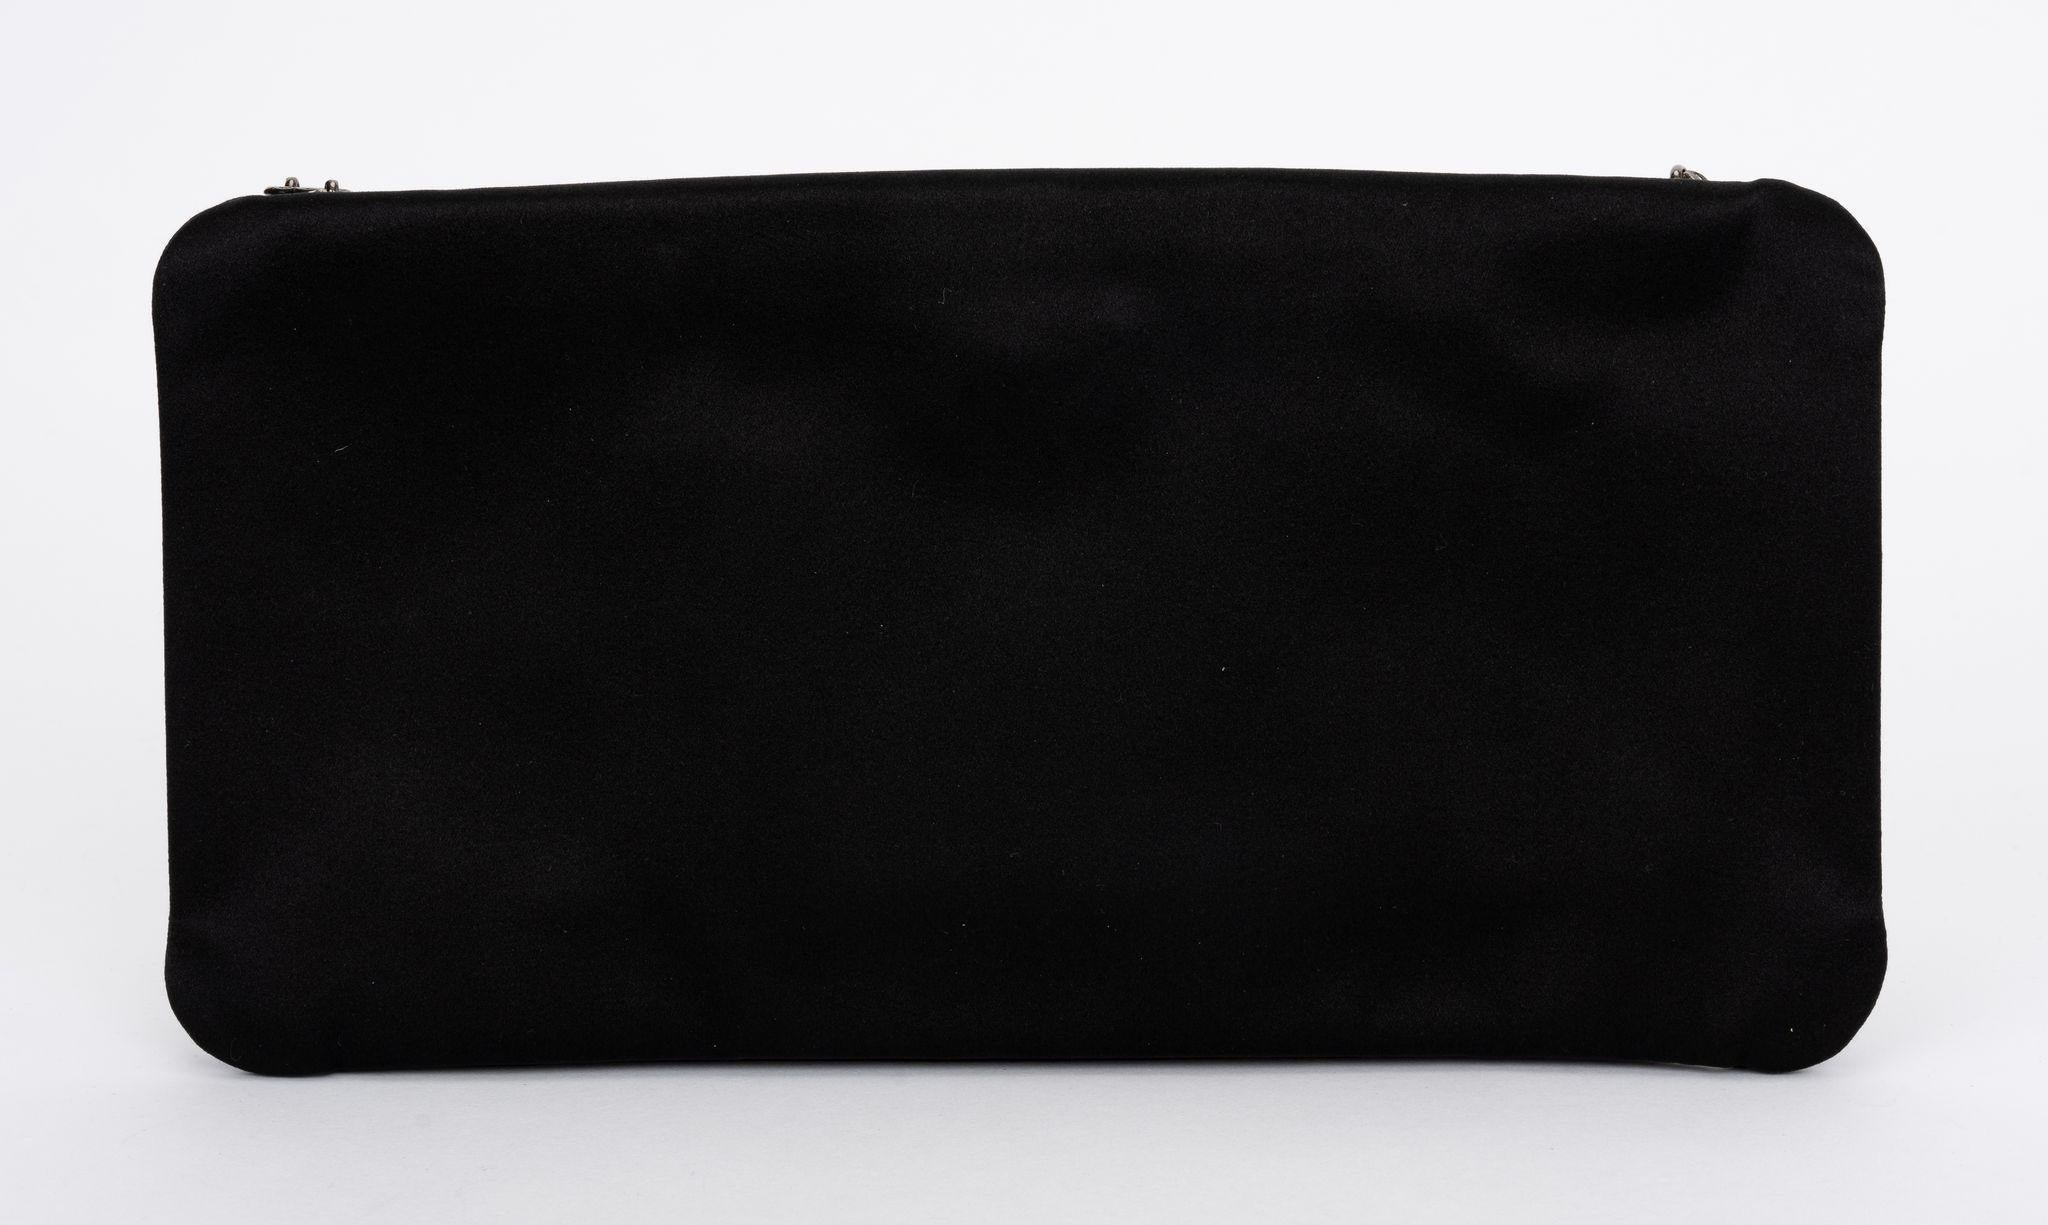 Chanel Black Satin Strass Camellia Clutch In Excellent Condition For Sale In West Hollywood, CA